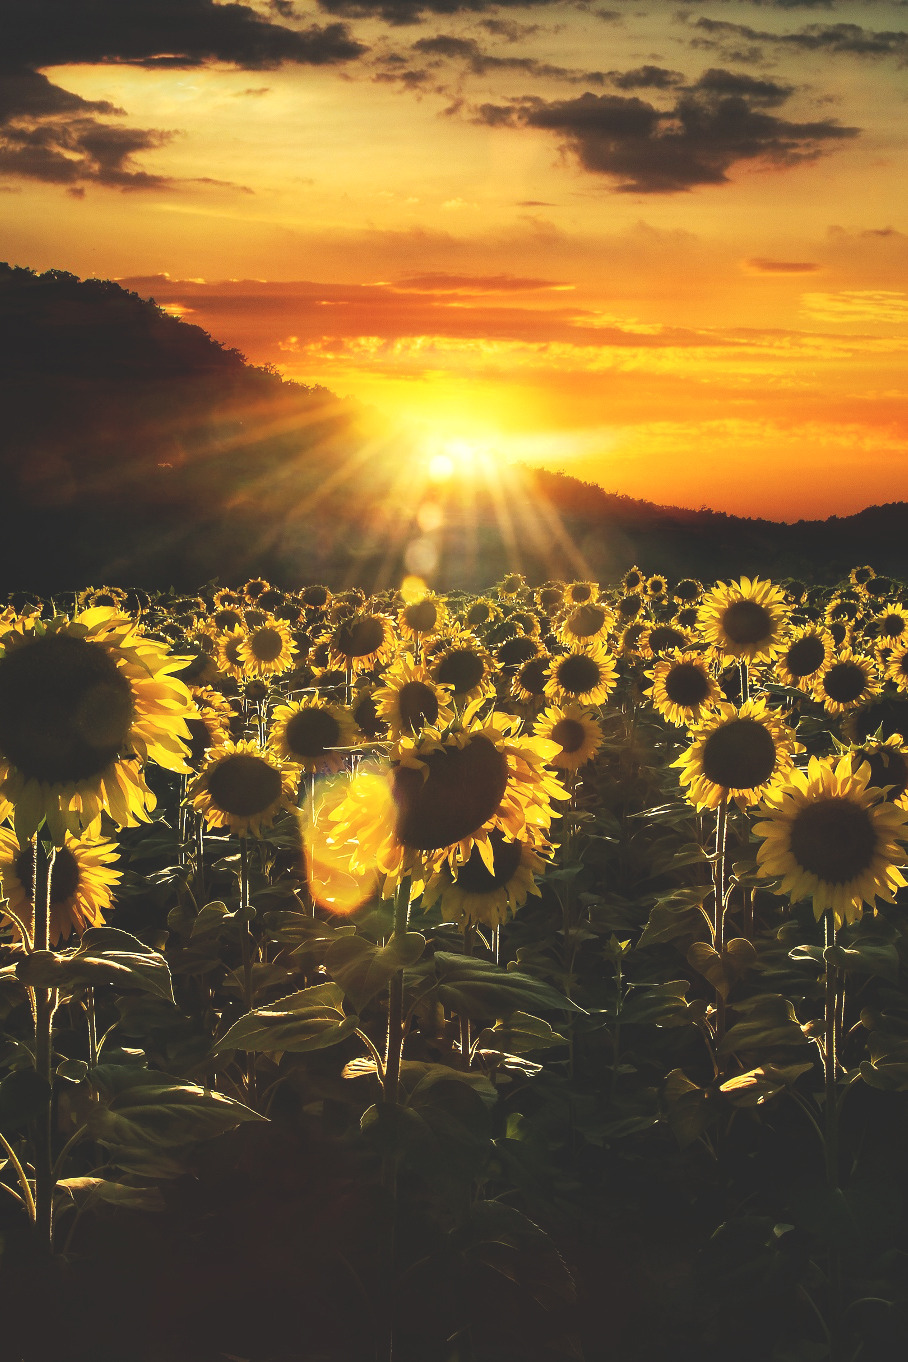 Country Whisper — lmmortalgod: Sunflowers at sunset by Nicodemo...